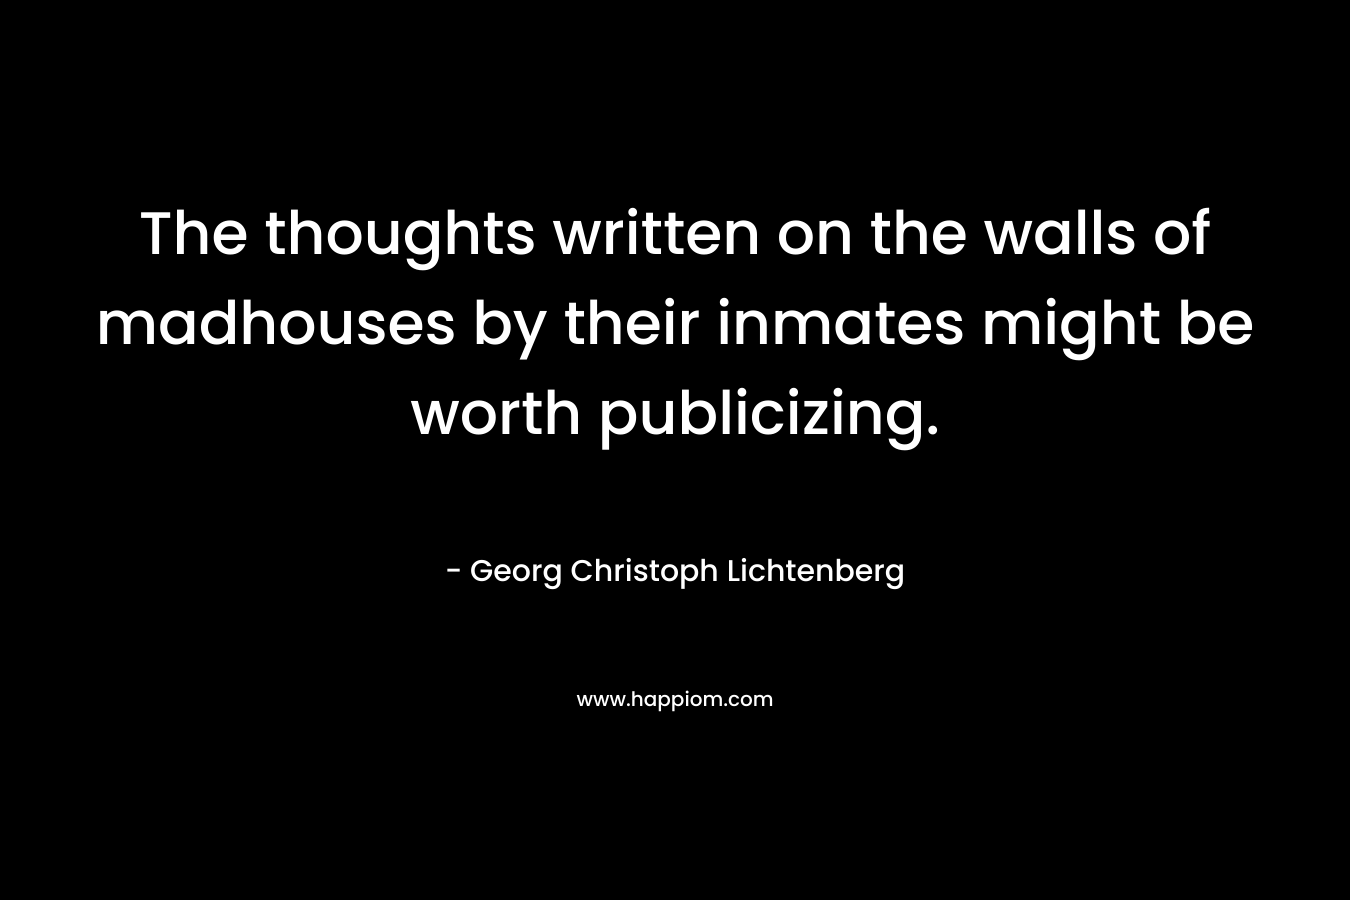 The thoughts written on the walls of madhouses by their inmates might be worth publicizing. – Georg Christoph Lichtenberg